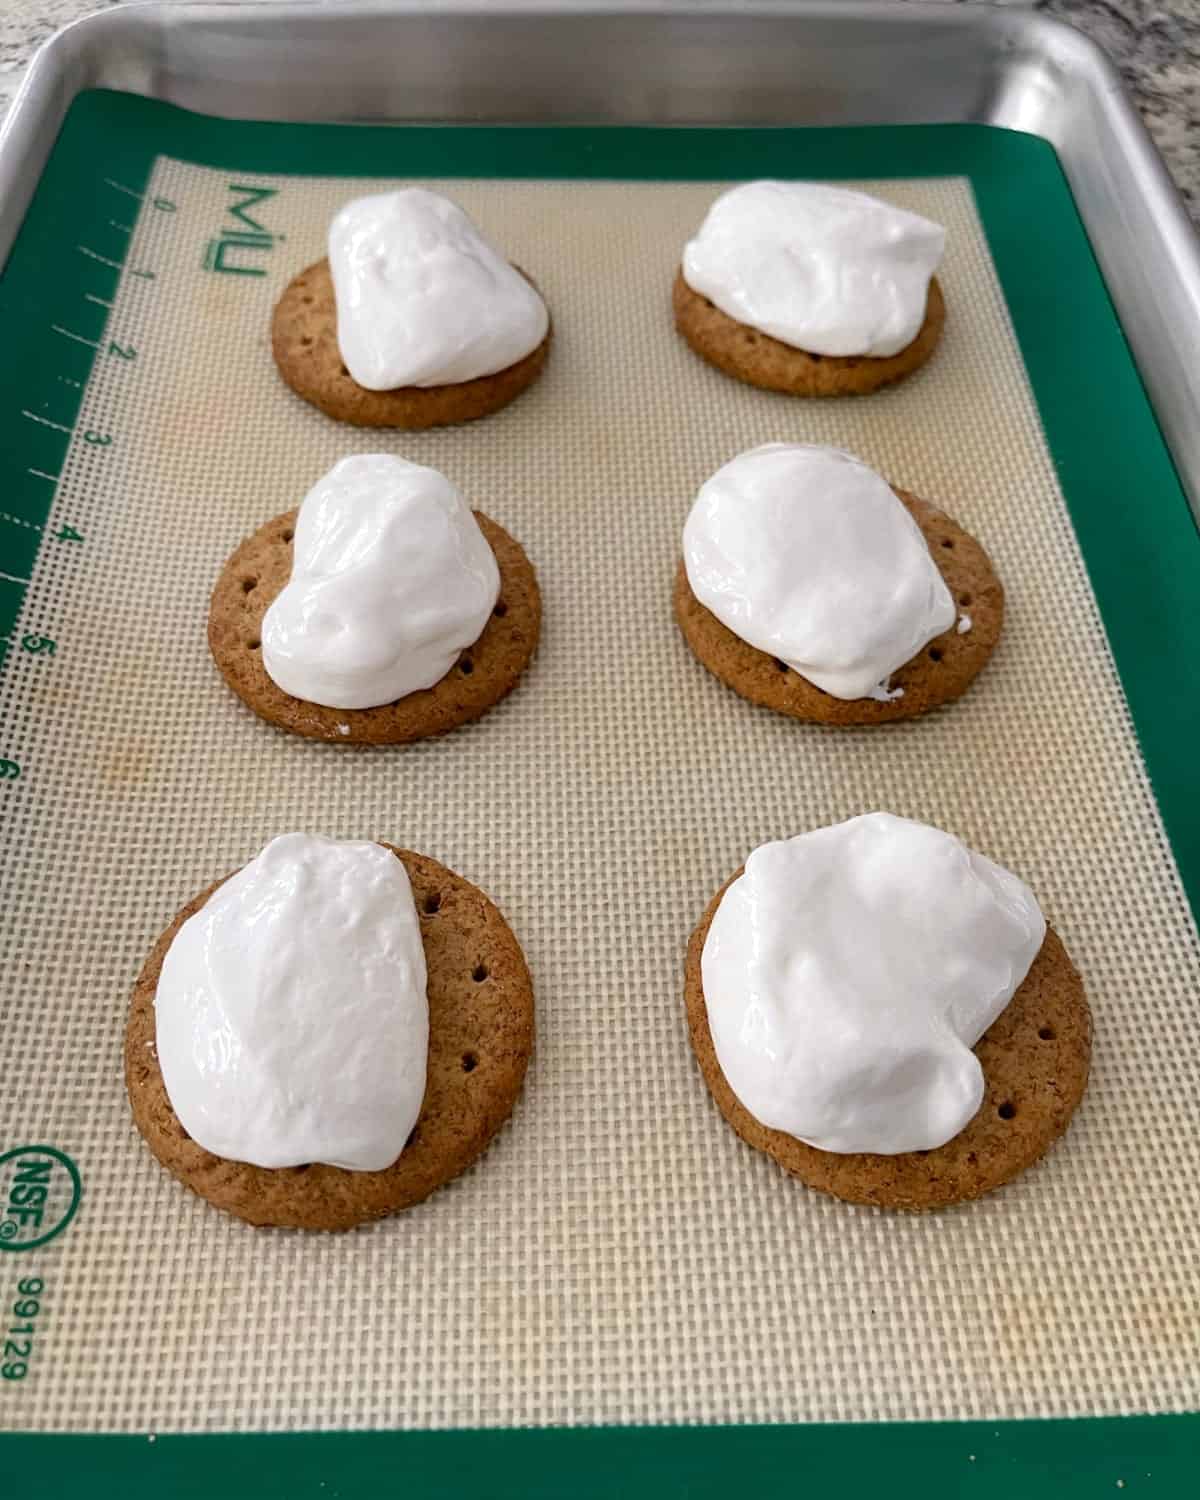 Carr's whole wheat crackers topped with dollop of marshmallow creme on silicone lined cookie sheet.